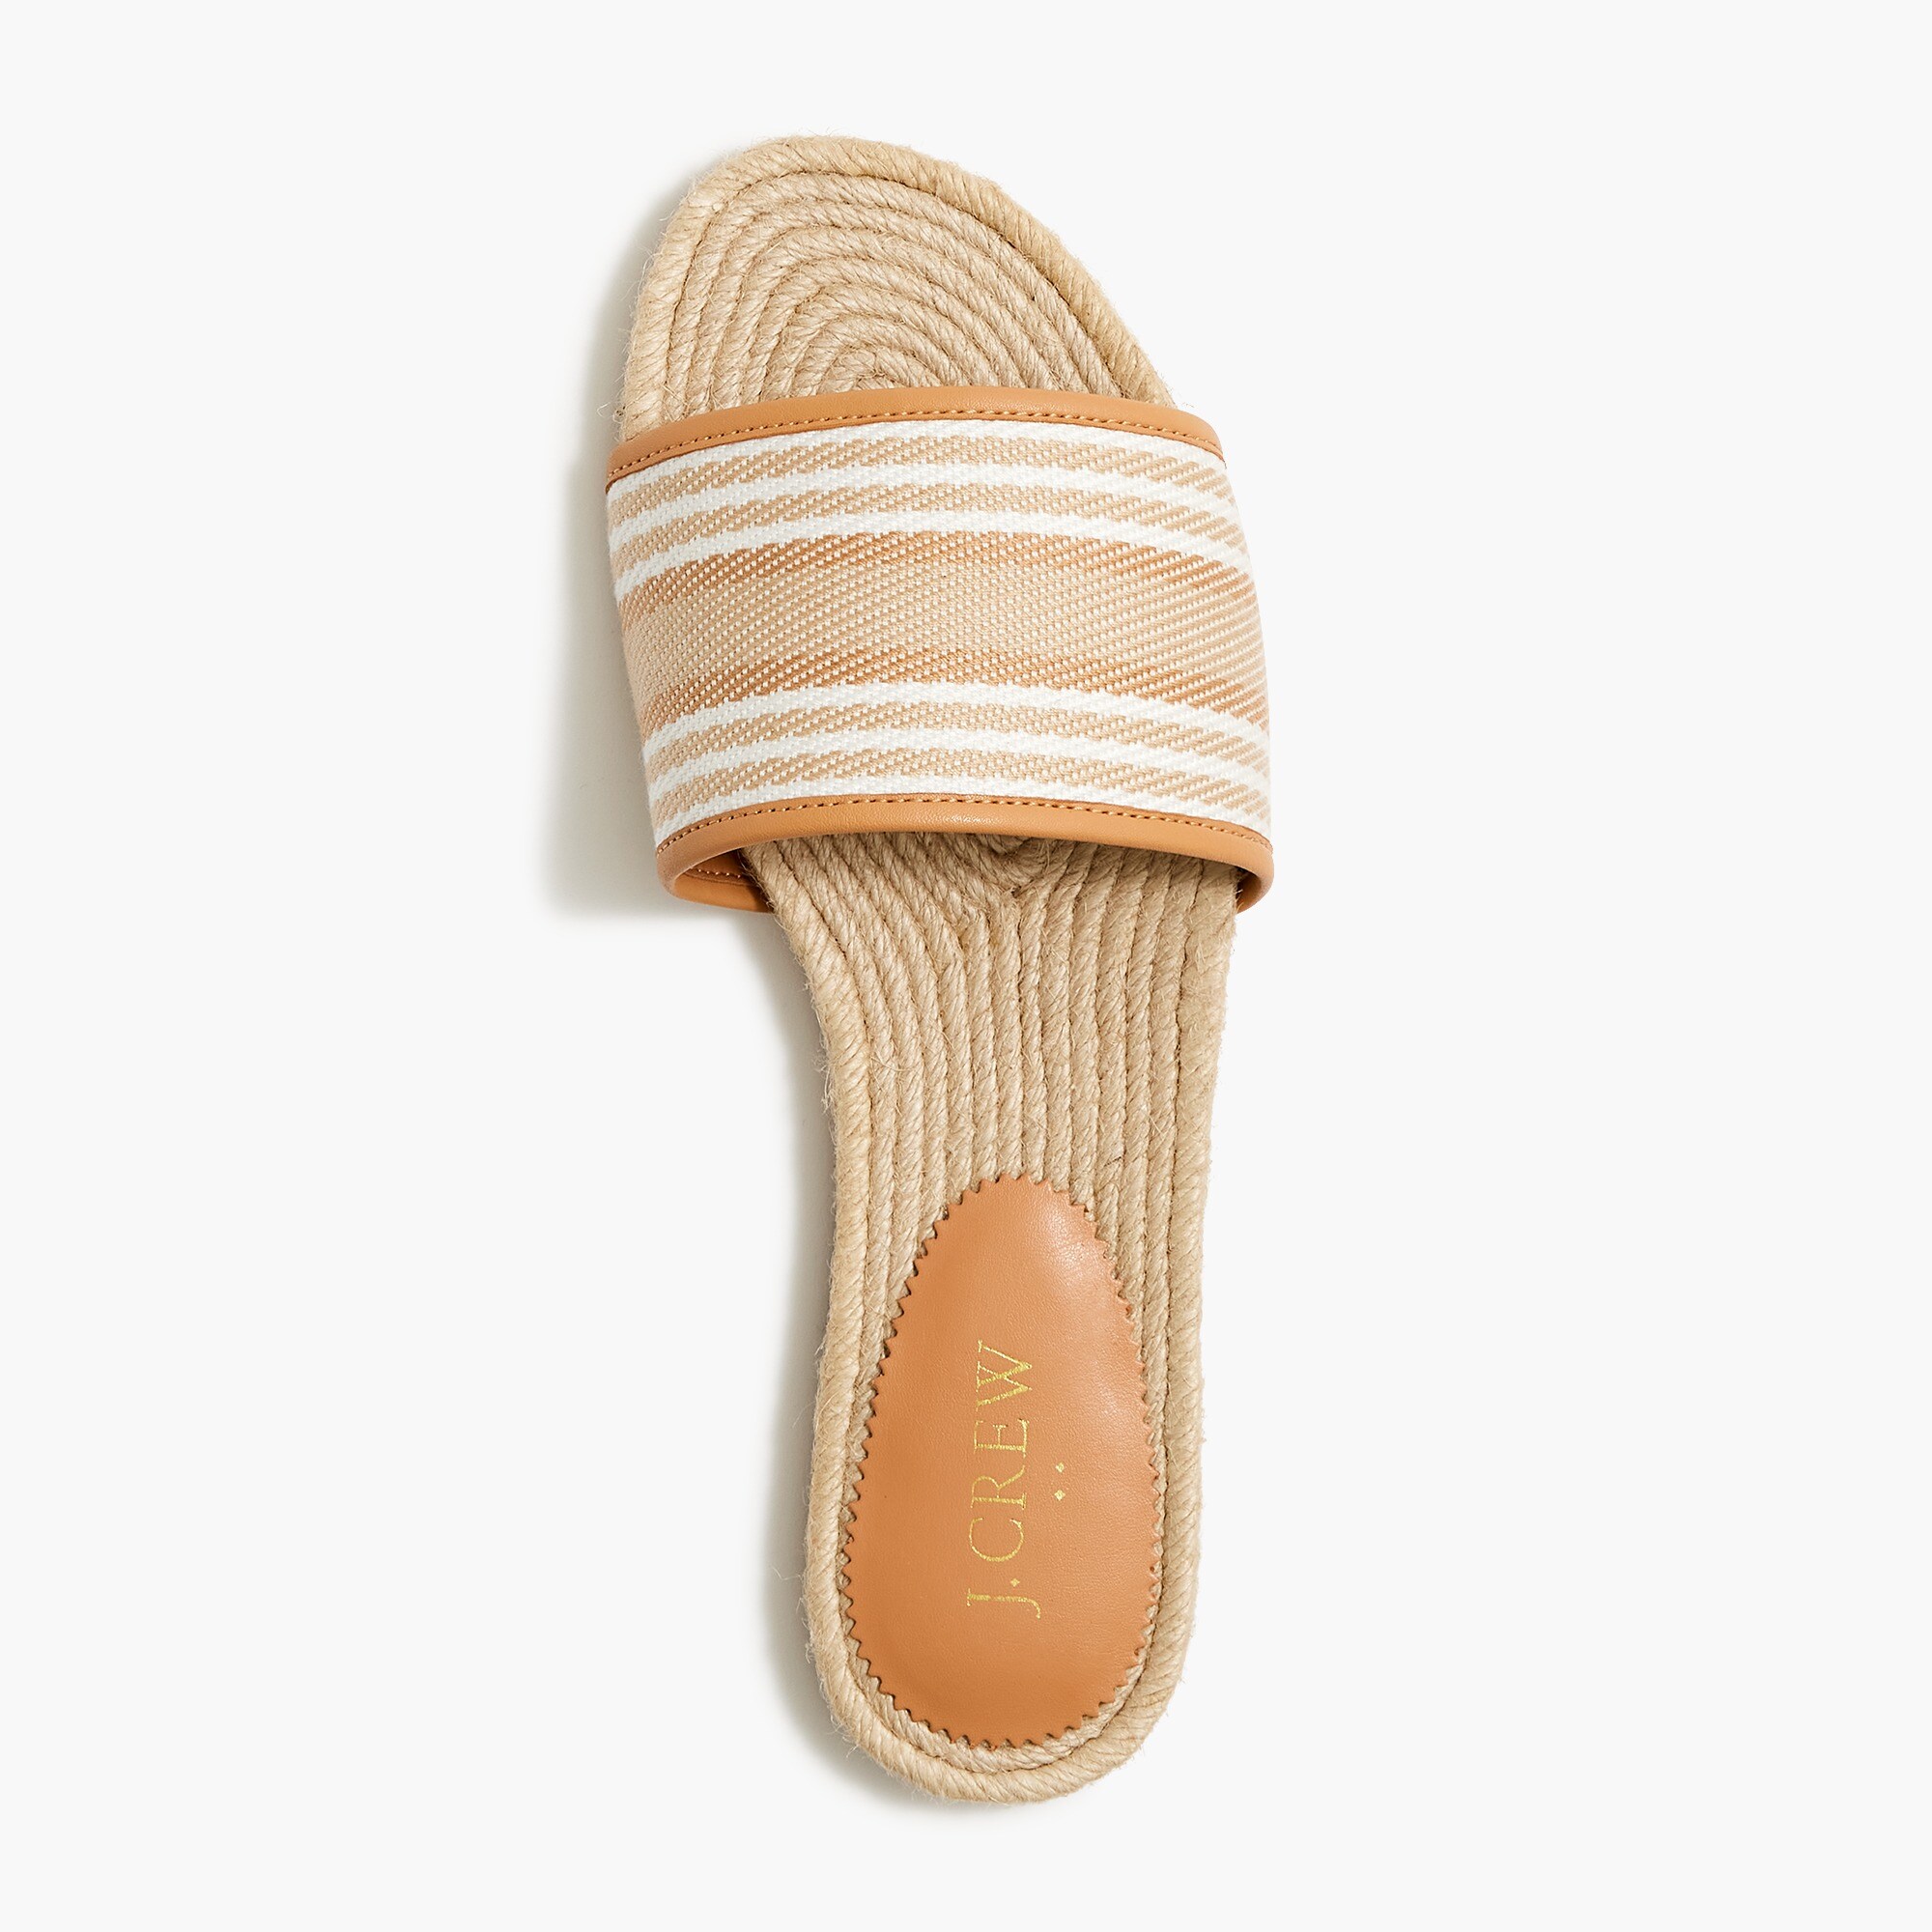 factory: espadrille slide sandals for women, right side, view zoomed